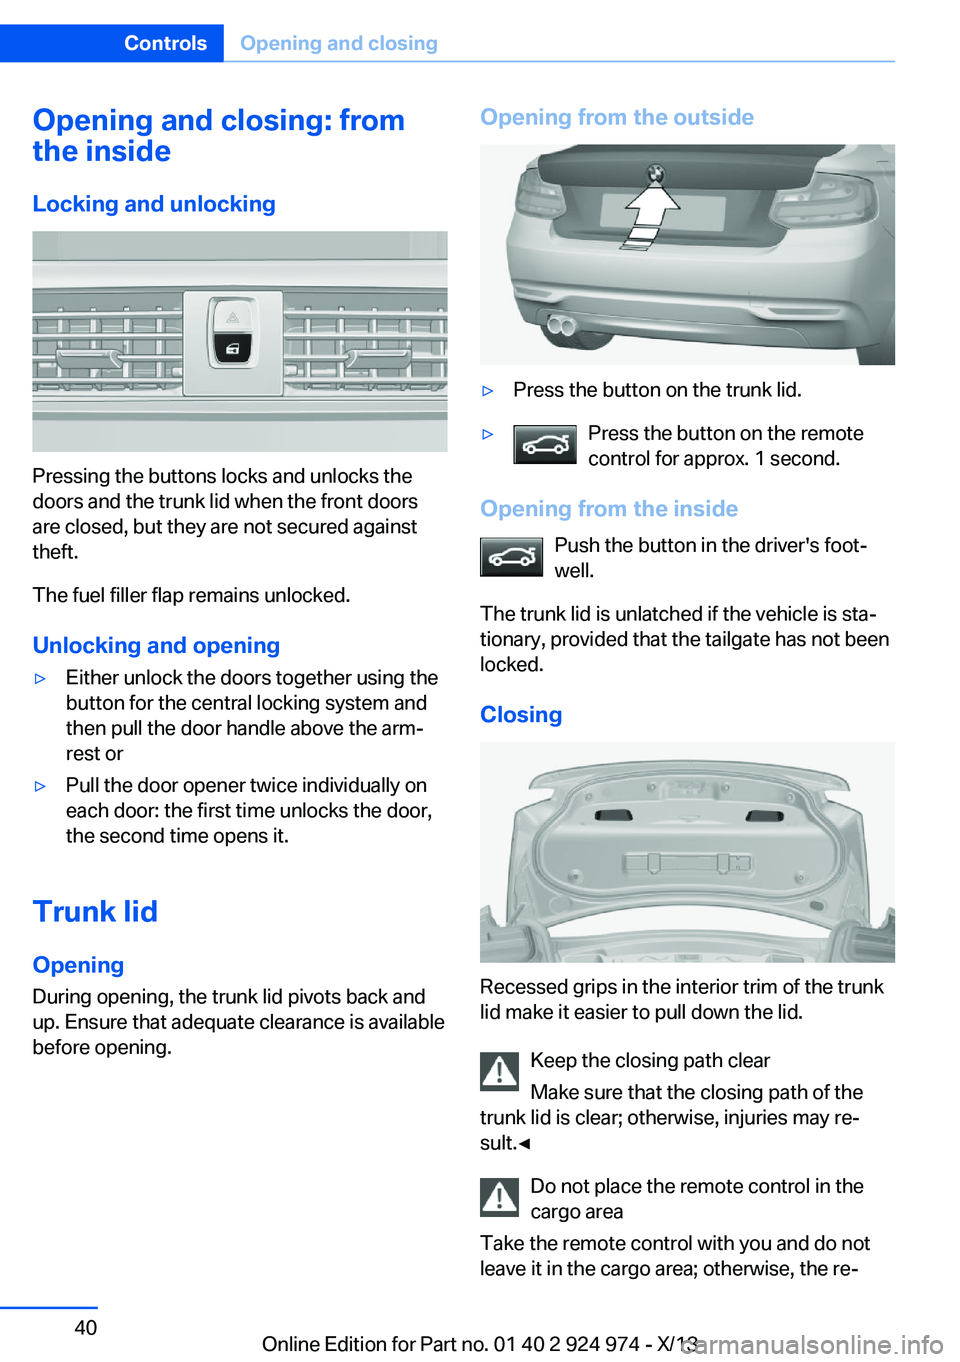 BMW 228ICOUPE 2014 Owners Guide Opening and closing: from
the inside
Locking and unlocking
Pressing the buttons locks and unlocks the
doors and the trunk lid when the front doors
are closed, but they are not secured against
theft.
T